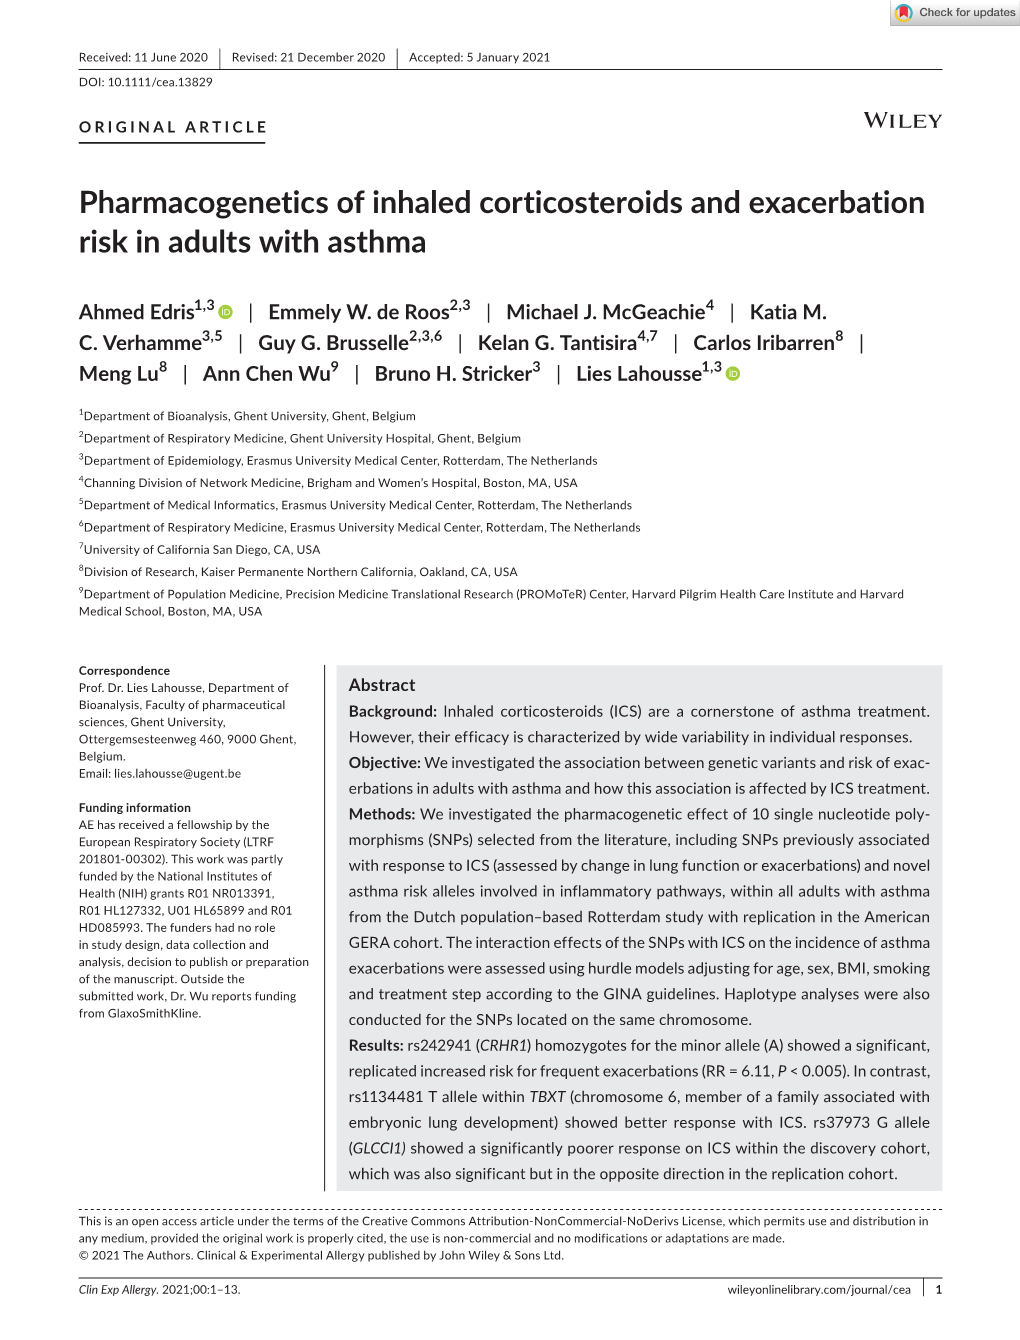 Pharmacogenetics of Inhaled Corticosteroids and Exacerbation Risk in Adults with Asthma